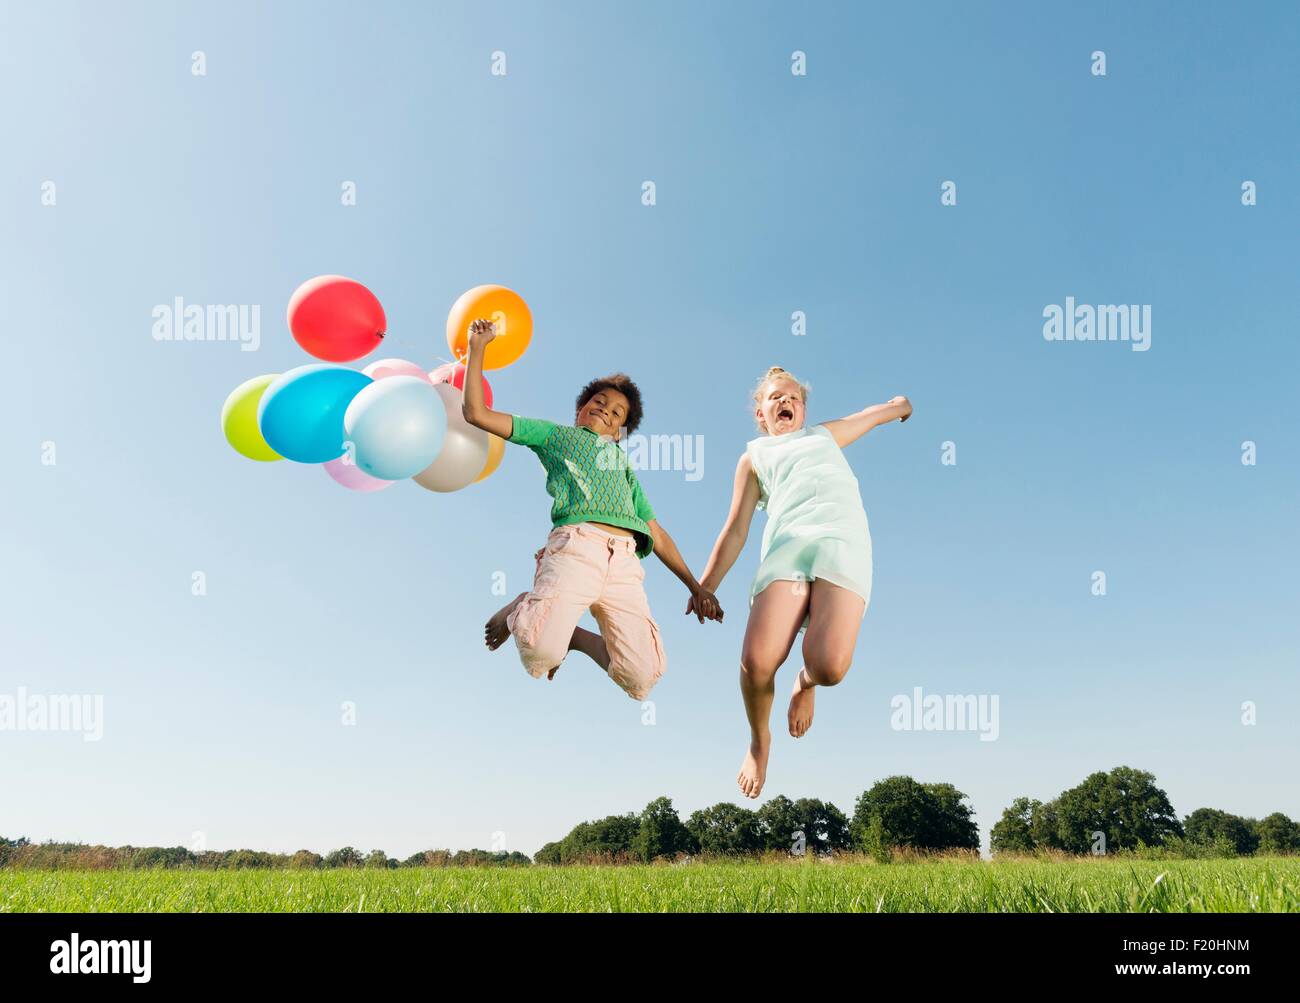 Girl and boy holding bunch of balloons jumping mid air in field Stock Photo